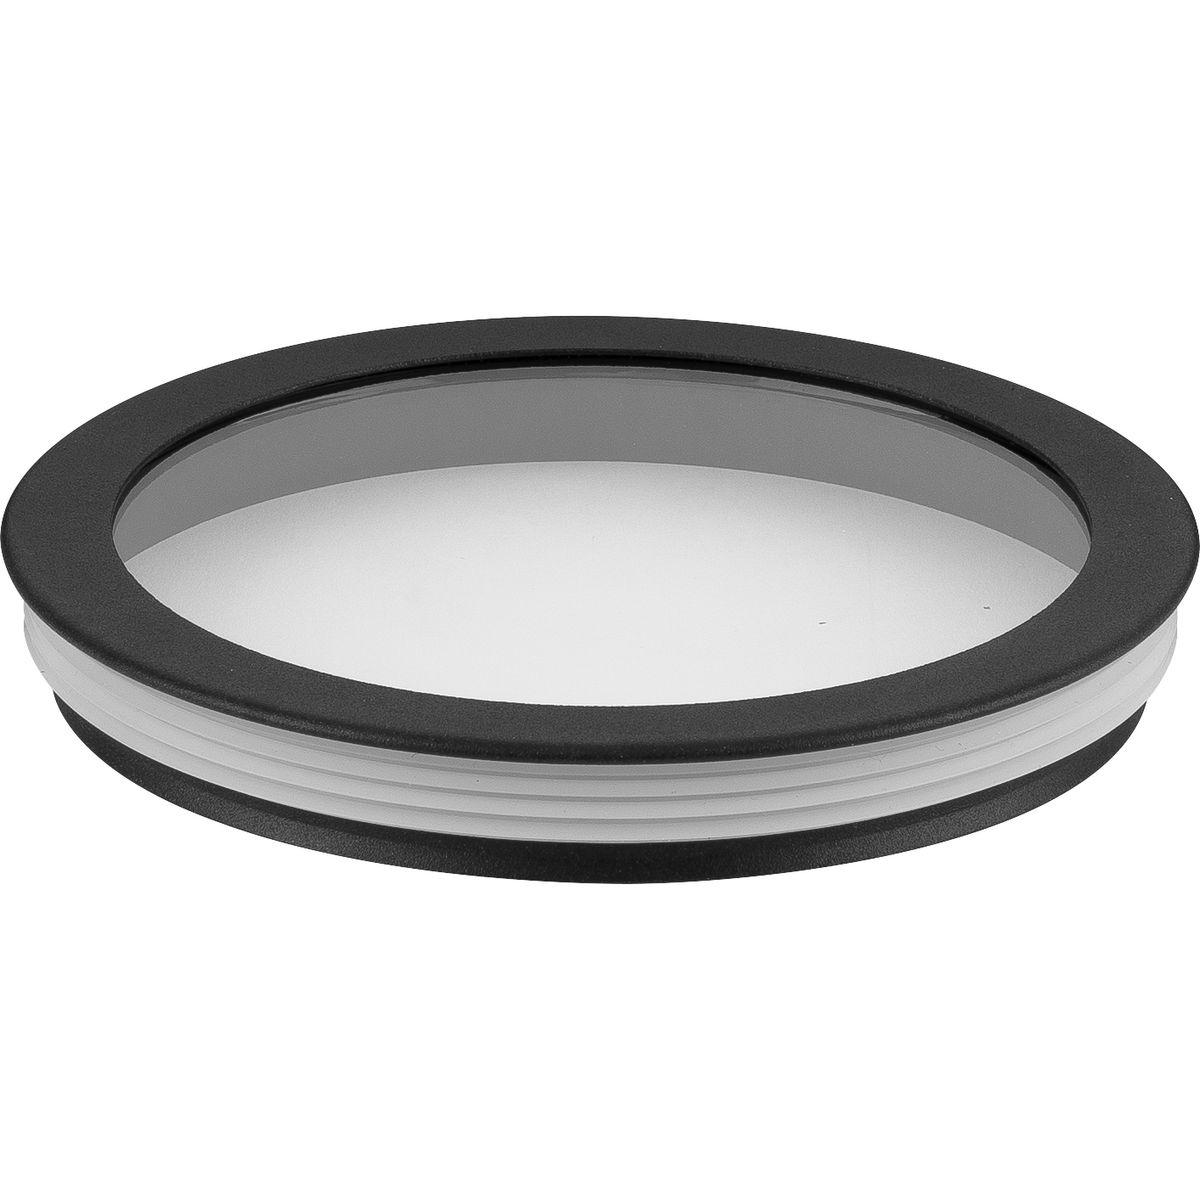 Hubbell P860046-031 Create a more versatile and custom lighting experience curated for your lifestyle and design taste with this round cylinder cover accessory. Never sacrifice form for function with this discrete, minimalist lens packed with a punch for optimal performance.